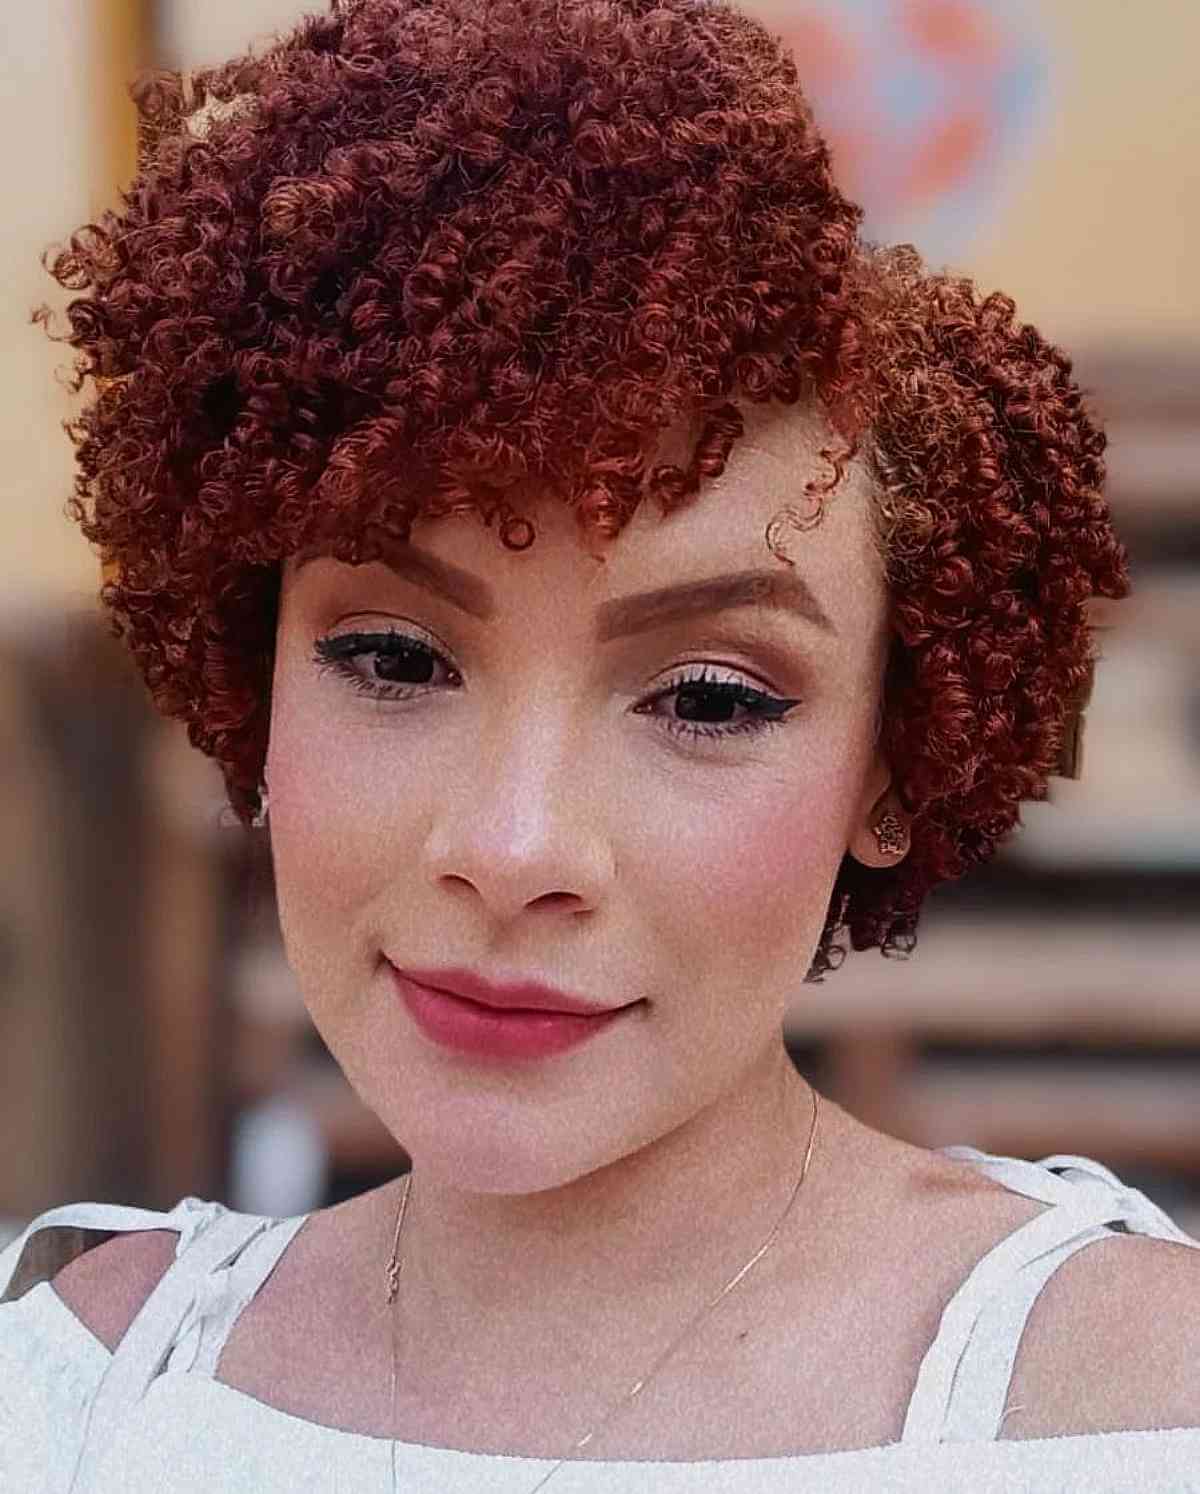 Short curly hair with side bangs